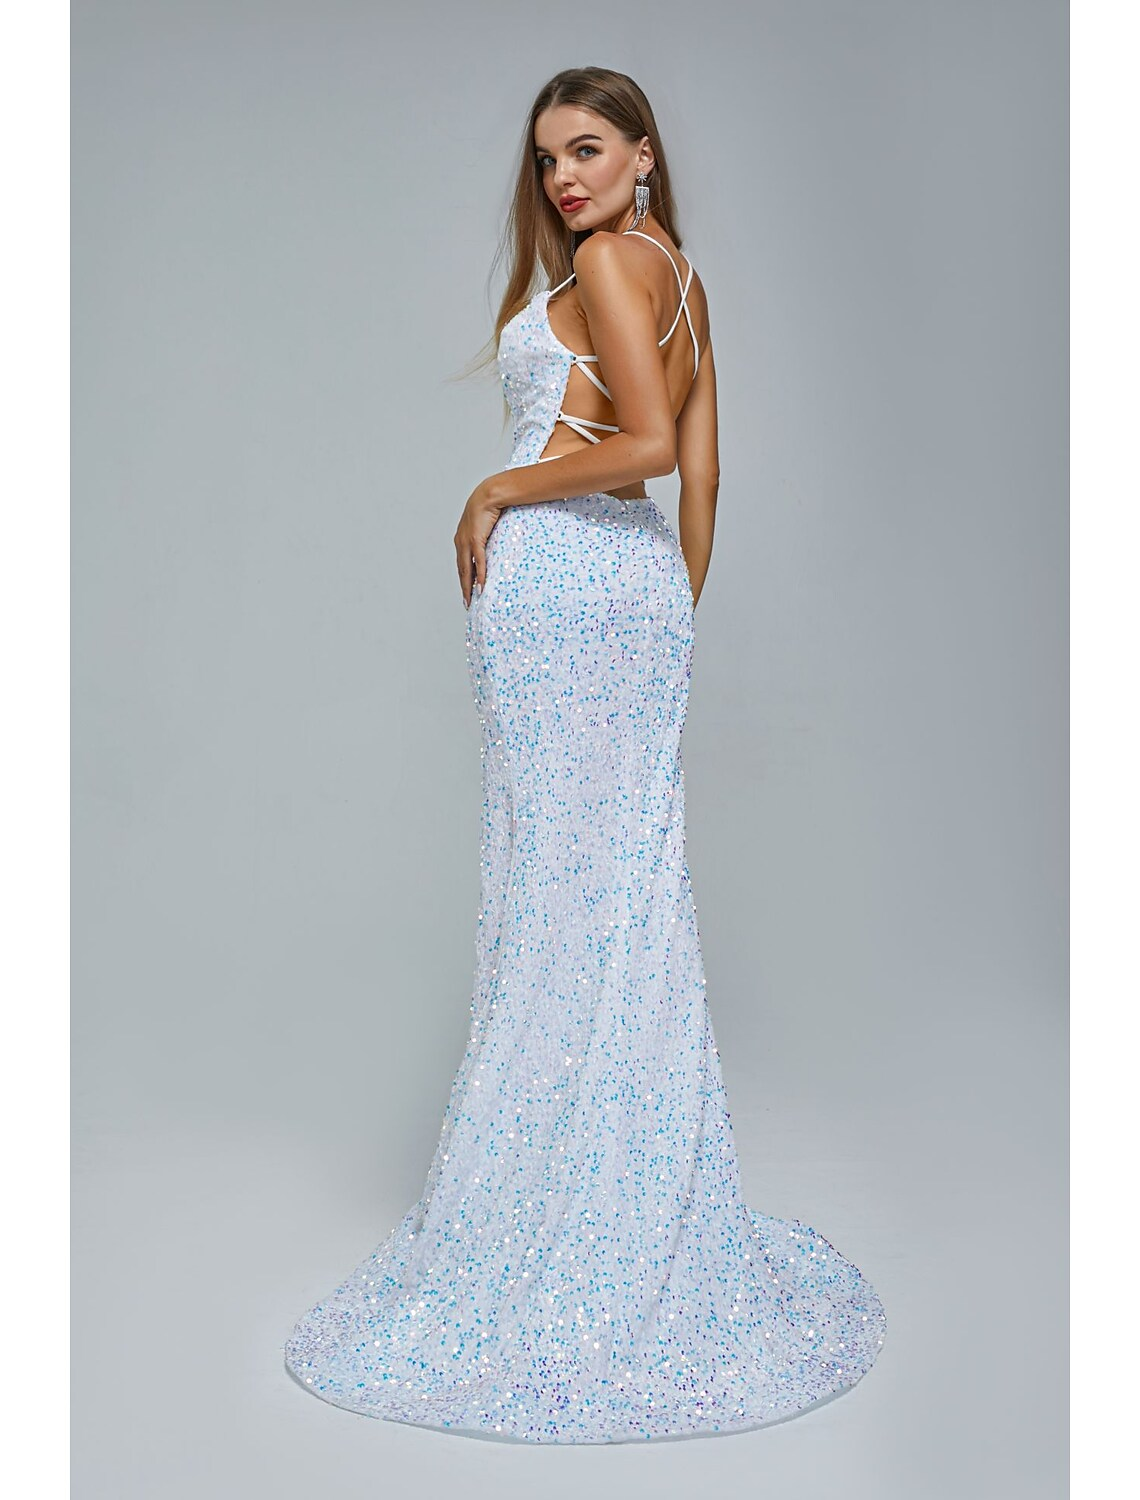 Evening Gown Elegant Dress Party Wear Train Sleeveless Strap Lace Crisscross Back with Sequin Slit